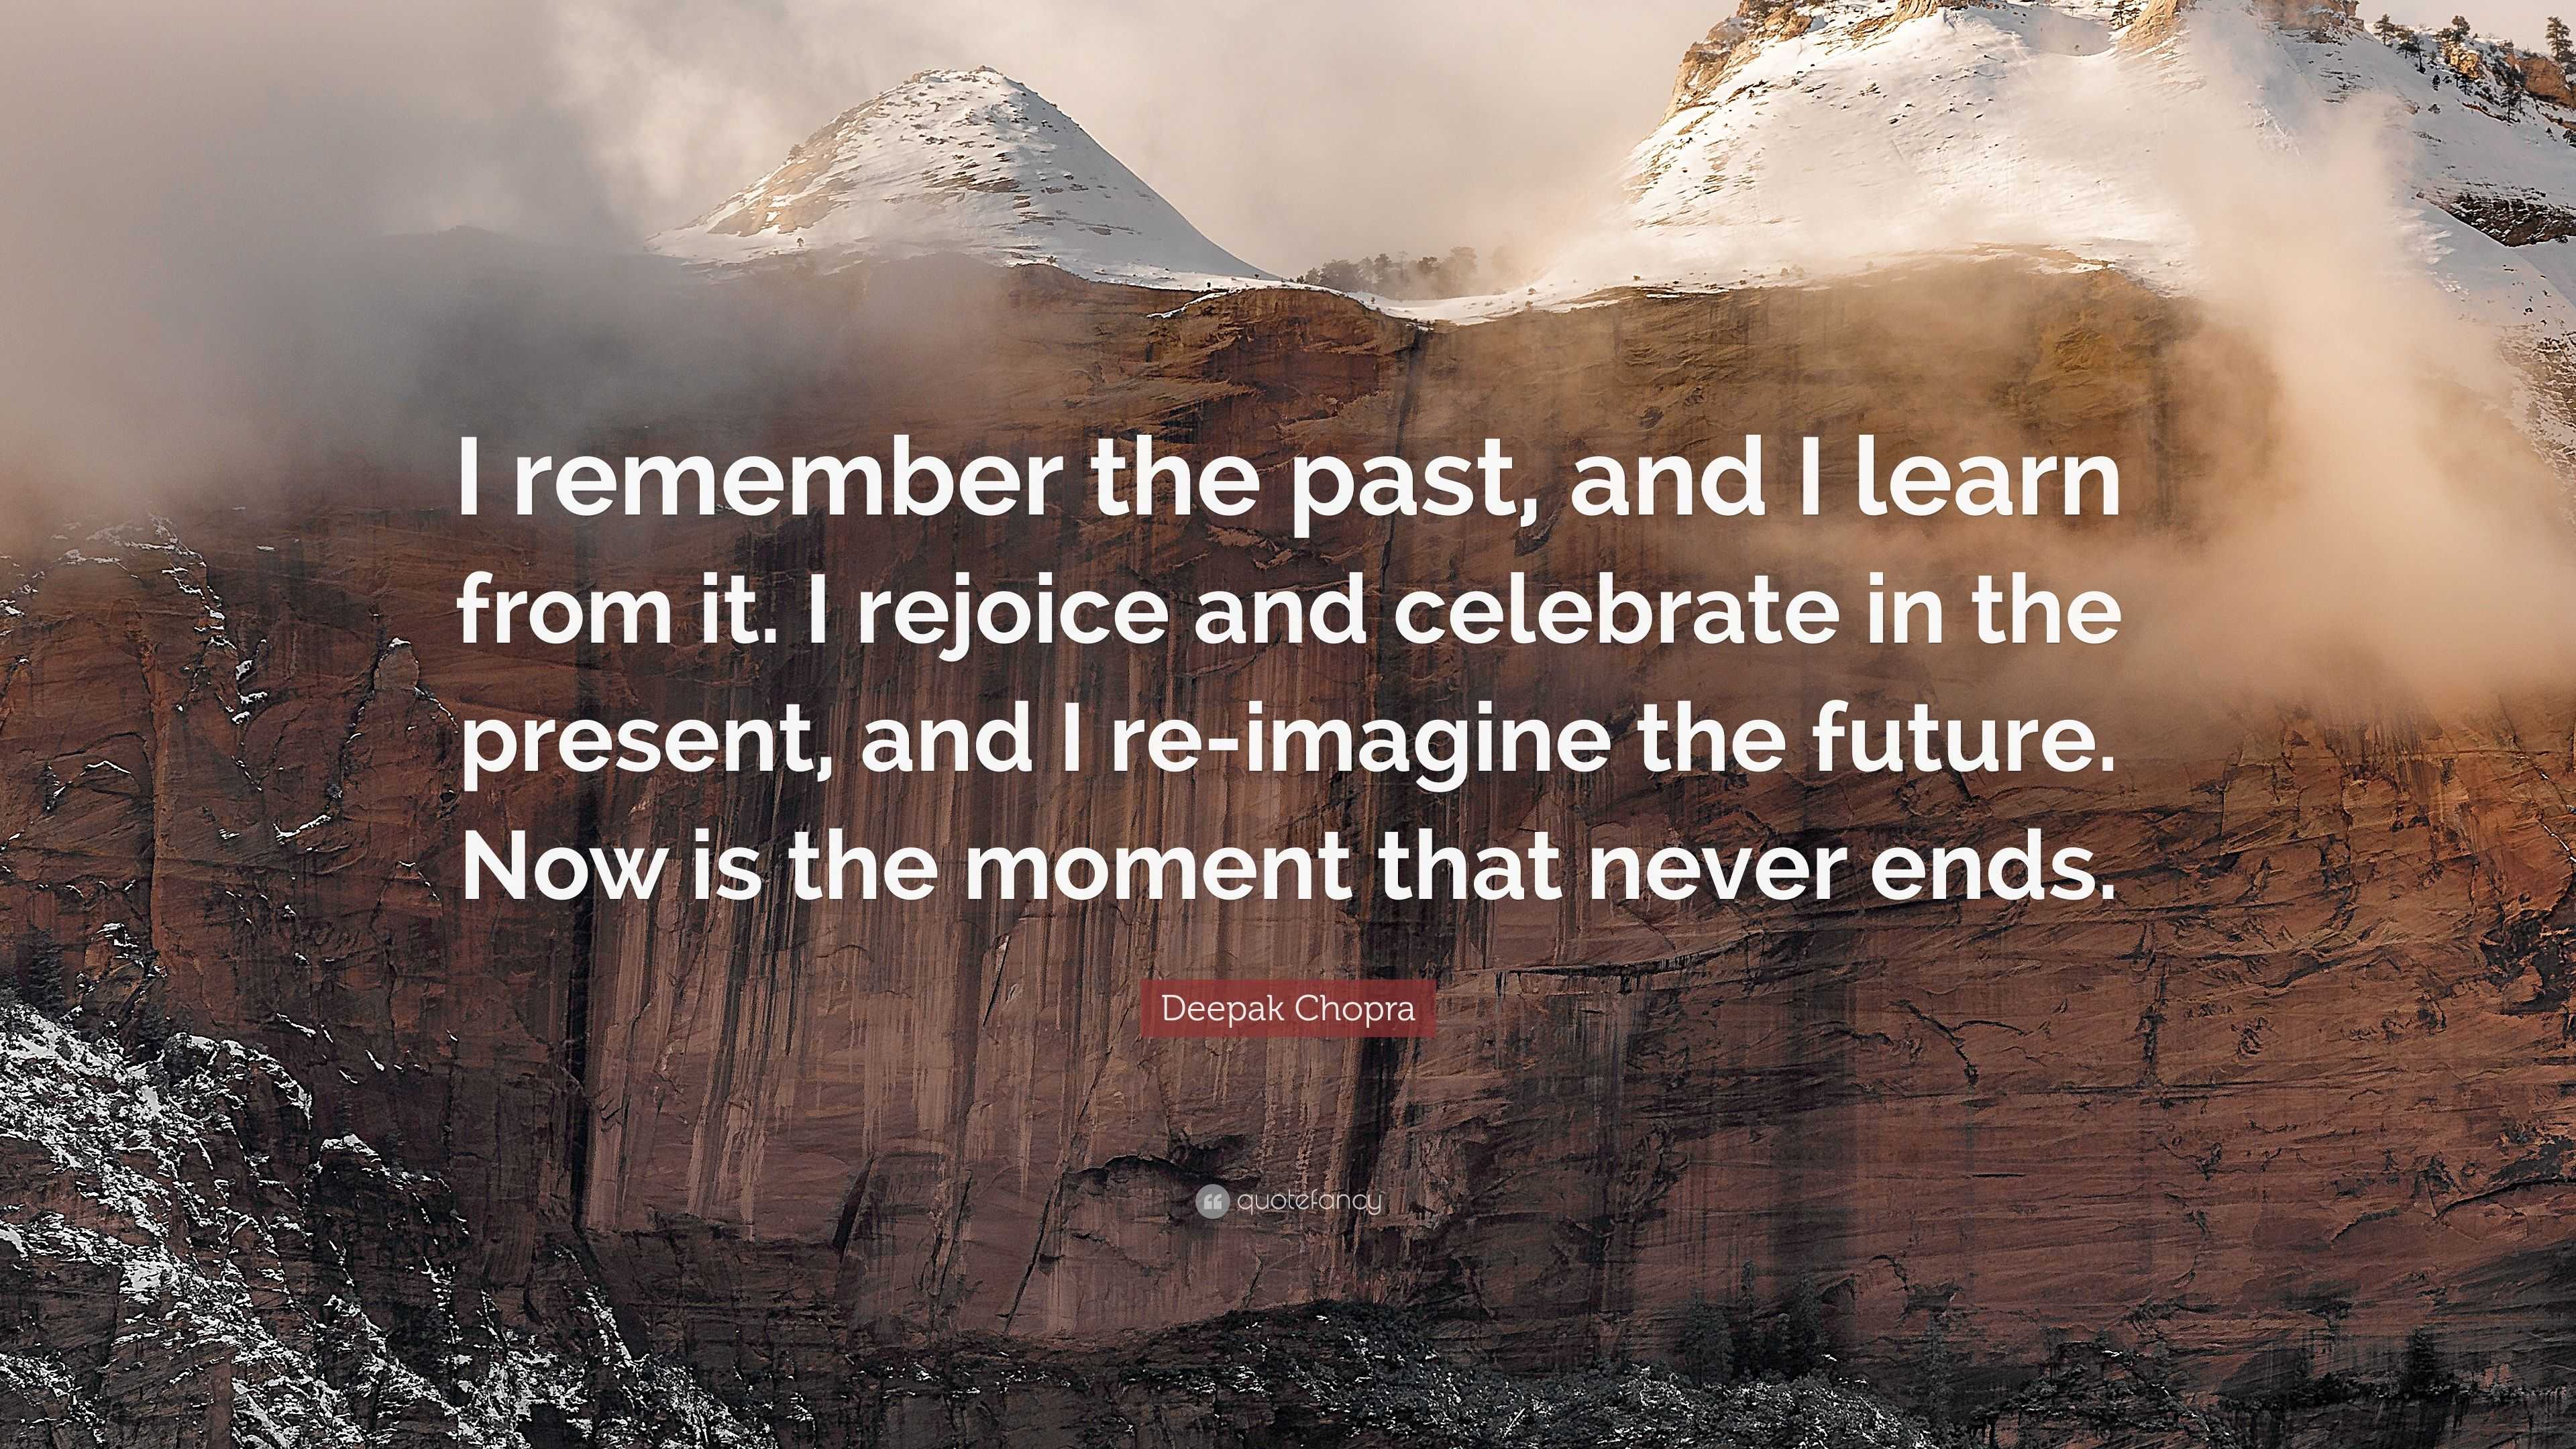 Deepak Chopra Quote: “I remember the past, and I learn from it. I ...